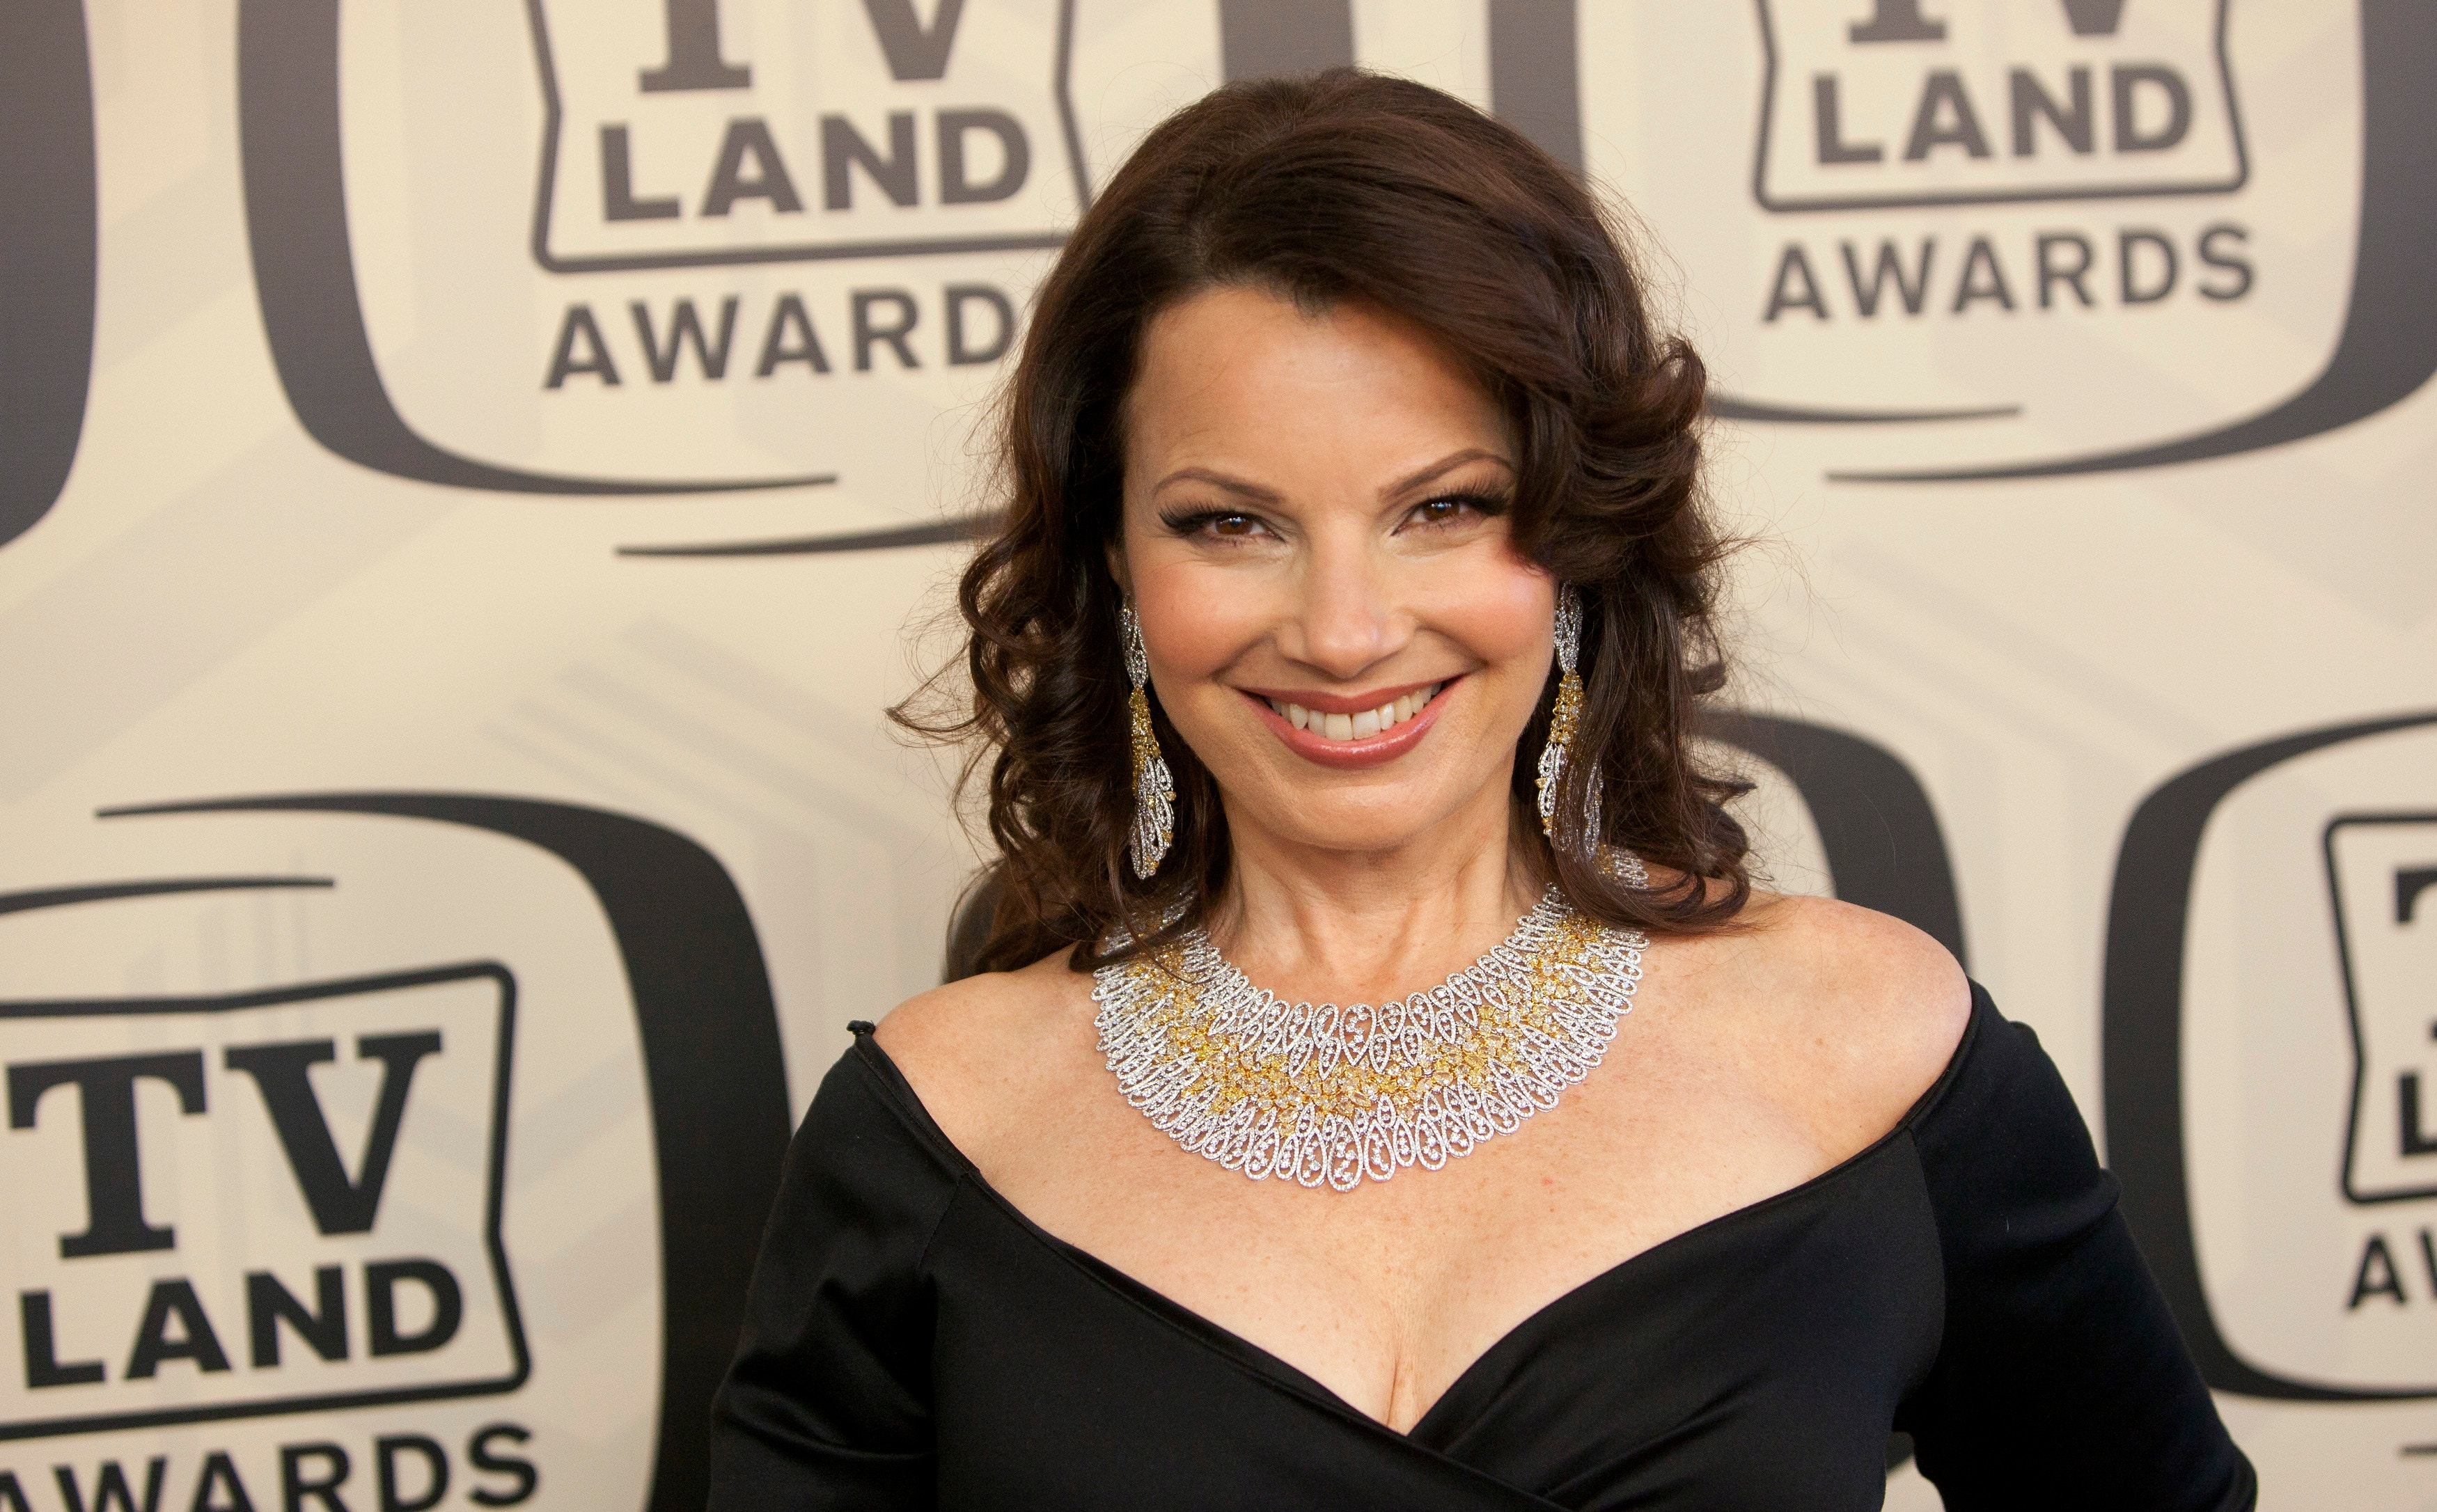 Fran Drescher says her ‘friend with benefits’ keeps her going: ‘Of course we have sex’